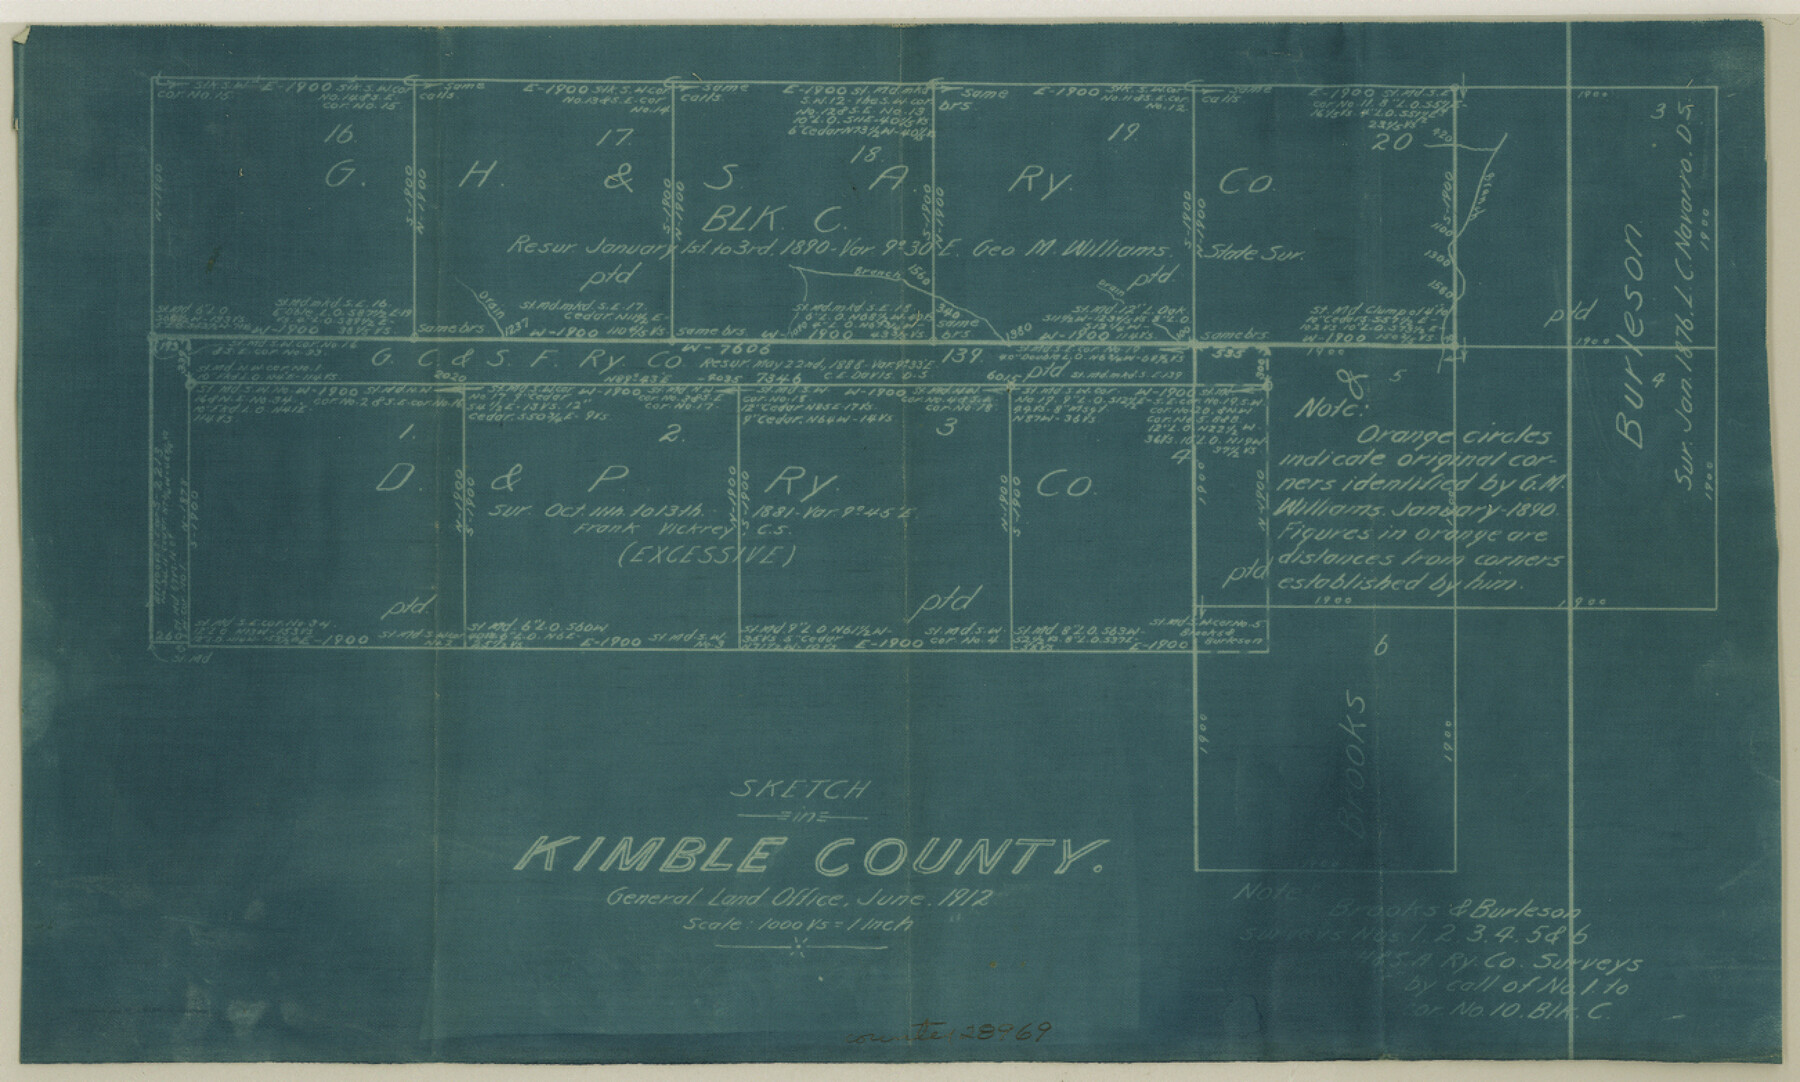 28969, Kimble County Sketch File 26, General Map Collection